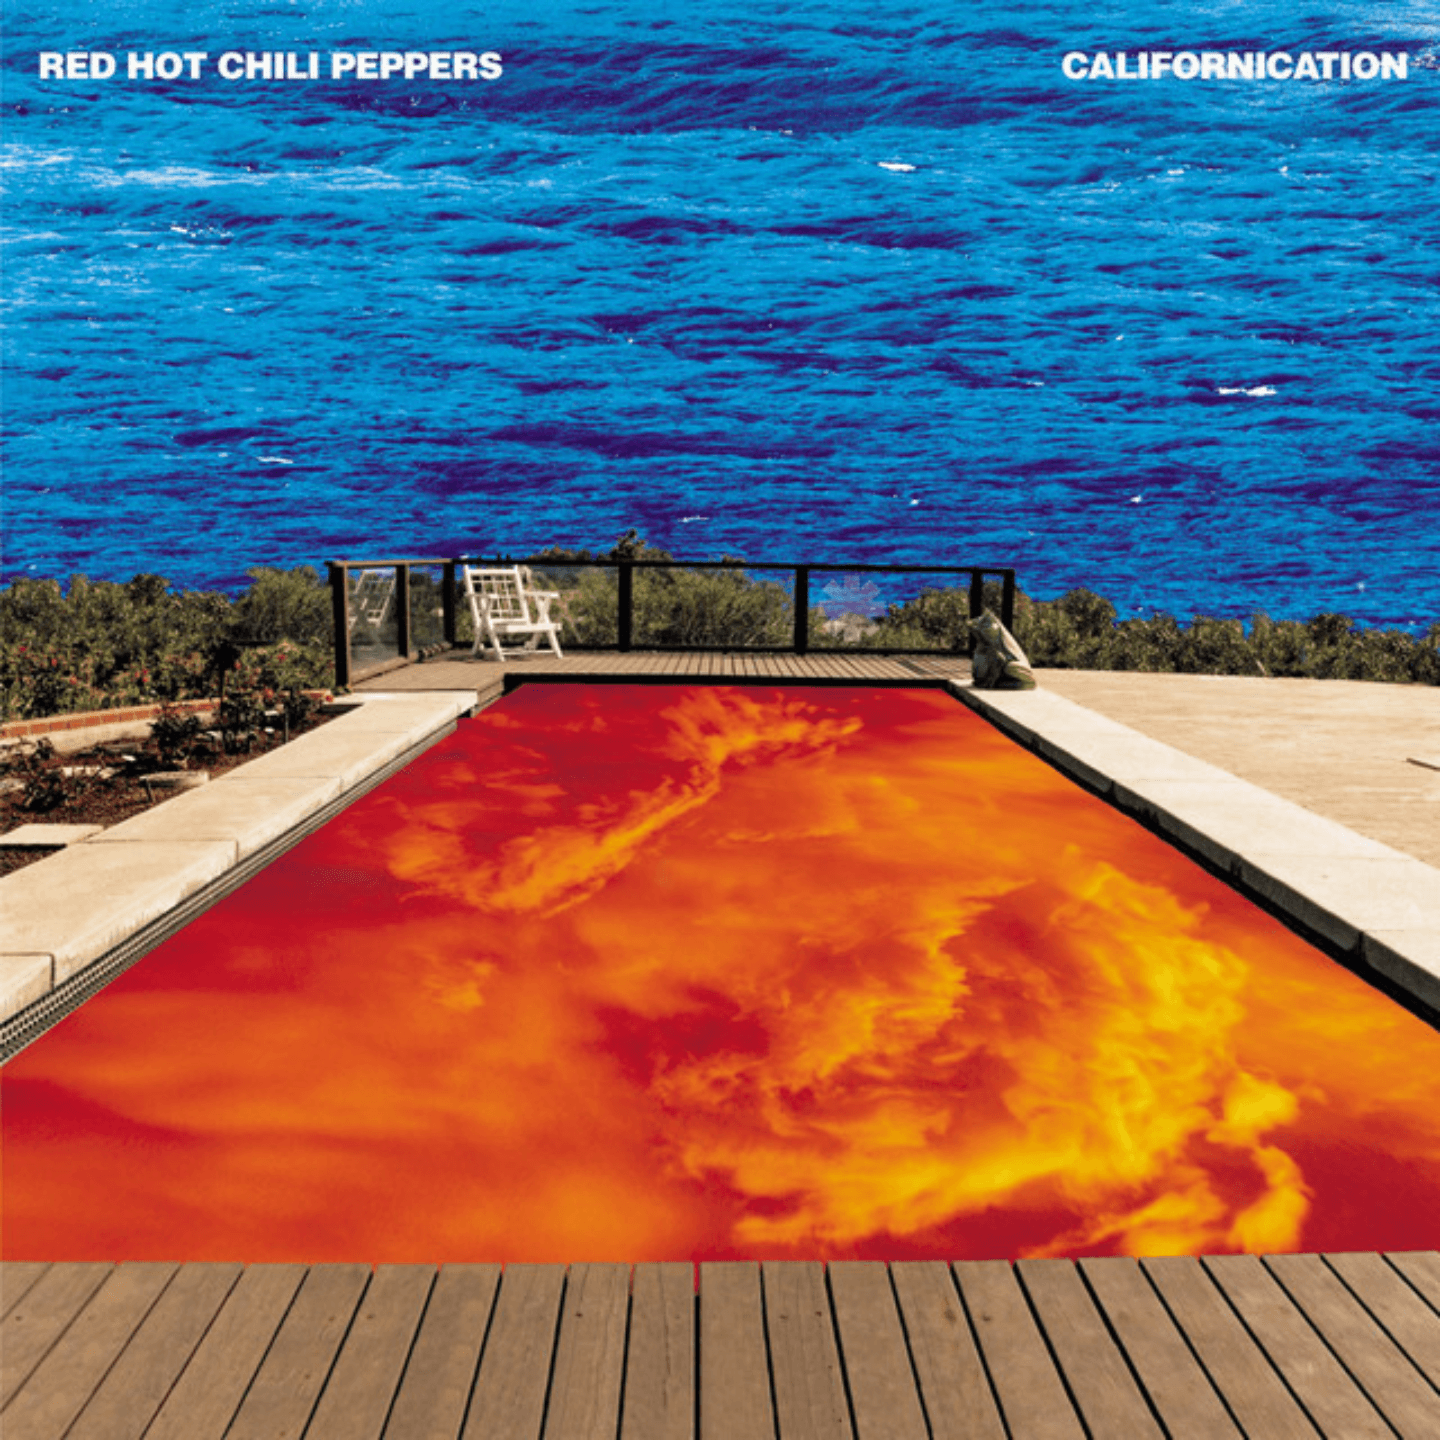 RED HOT CHILI PEPPERS - Californication 2xLP 180g Vinyl